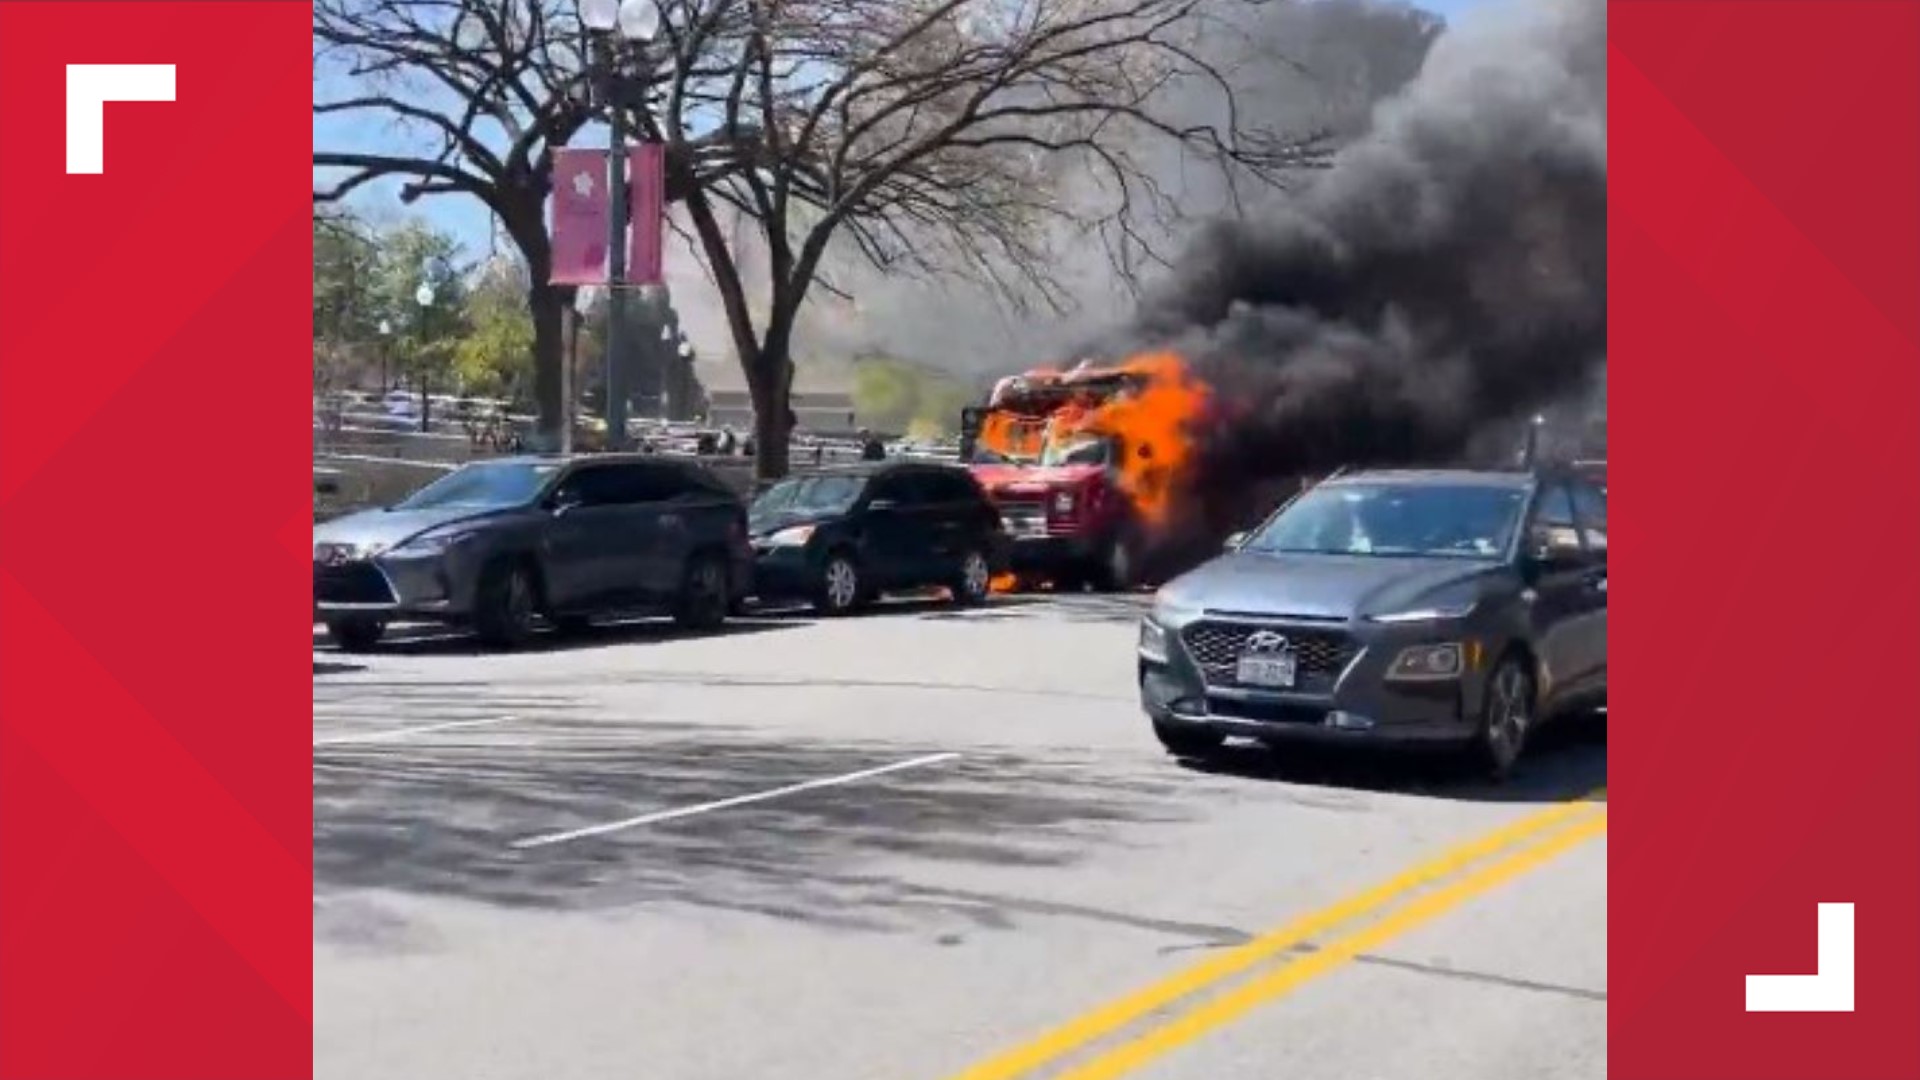 A food truck fire on Constitution Avenue sent one person to the hospital on Sunday. VC: Reddit user ShiftlessWhenIdle.